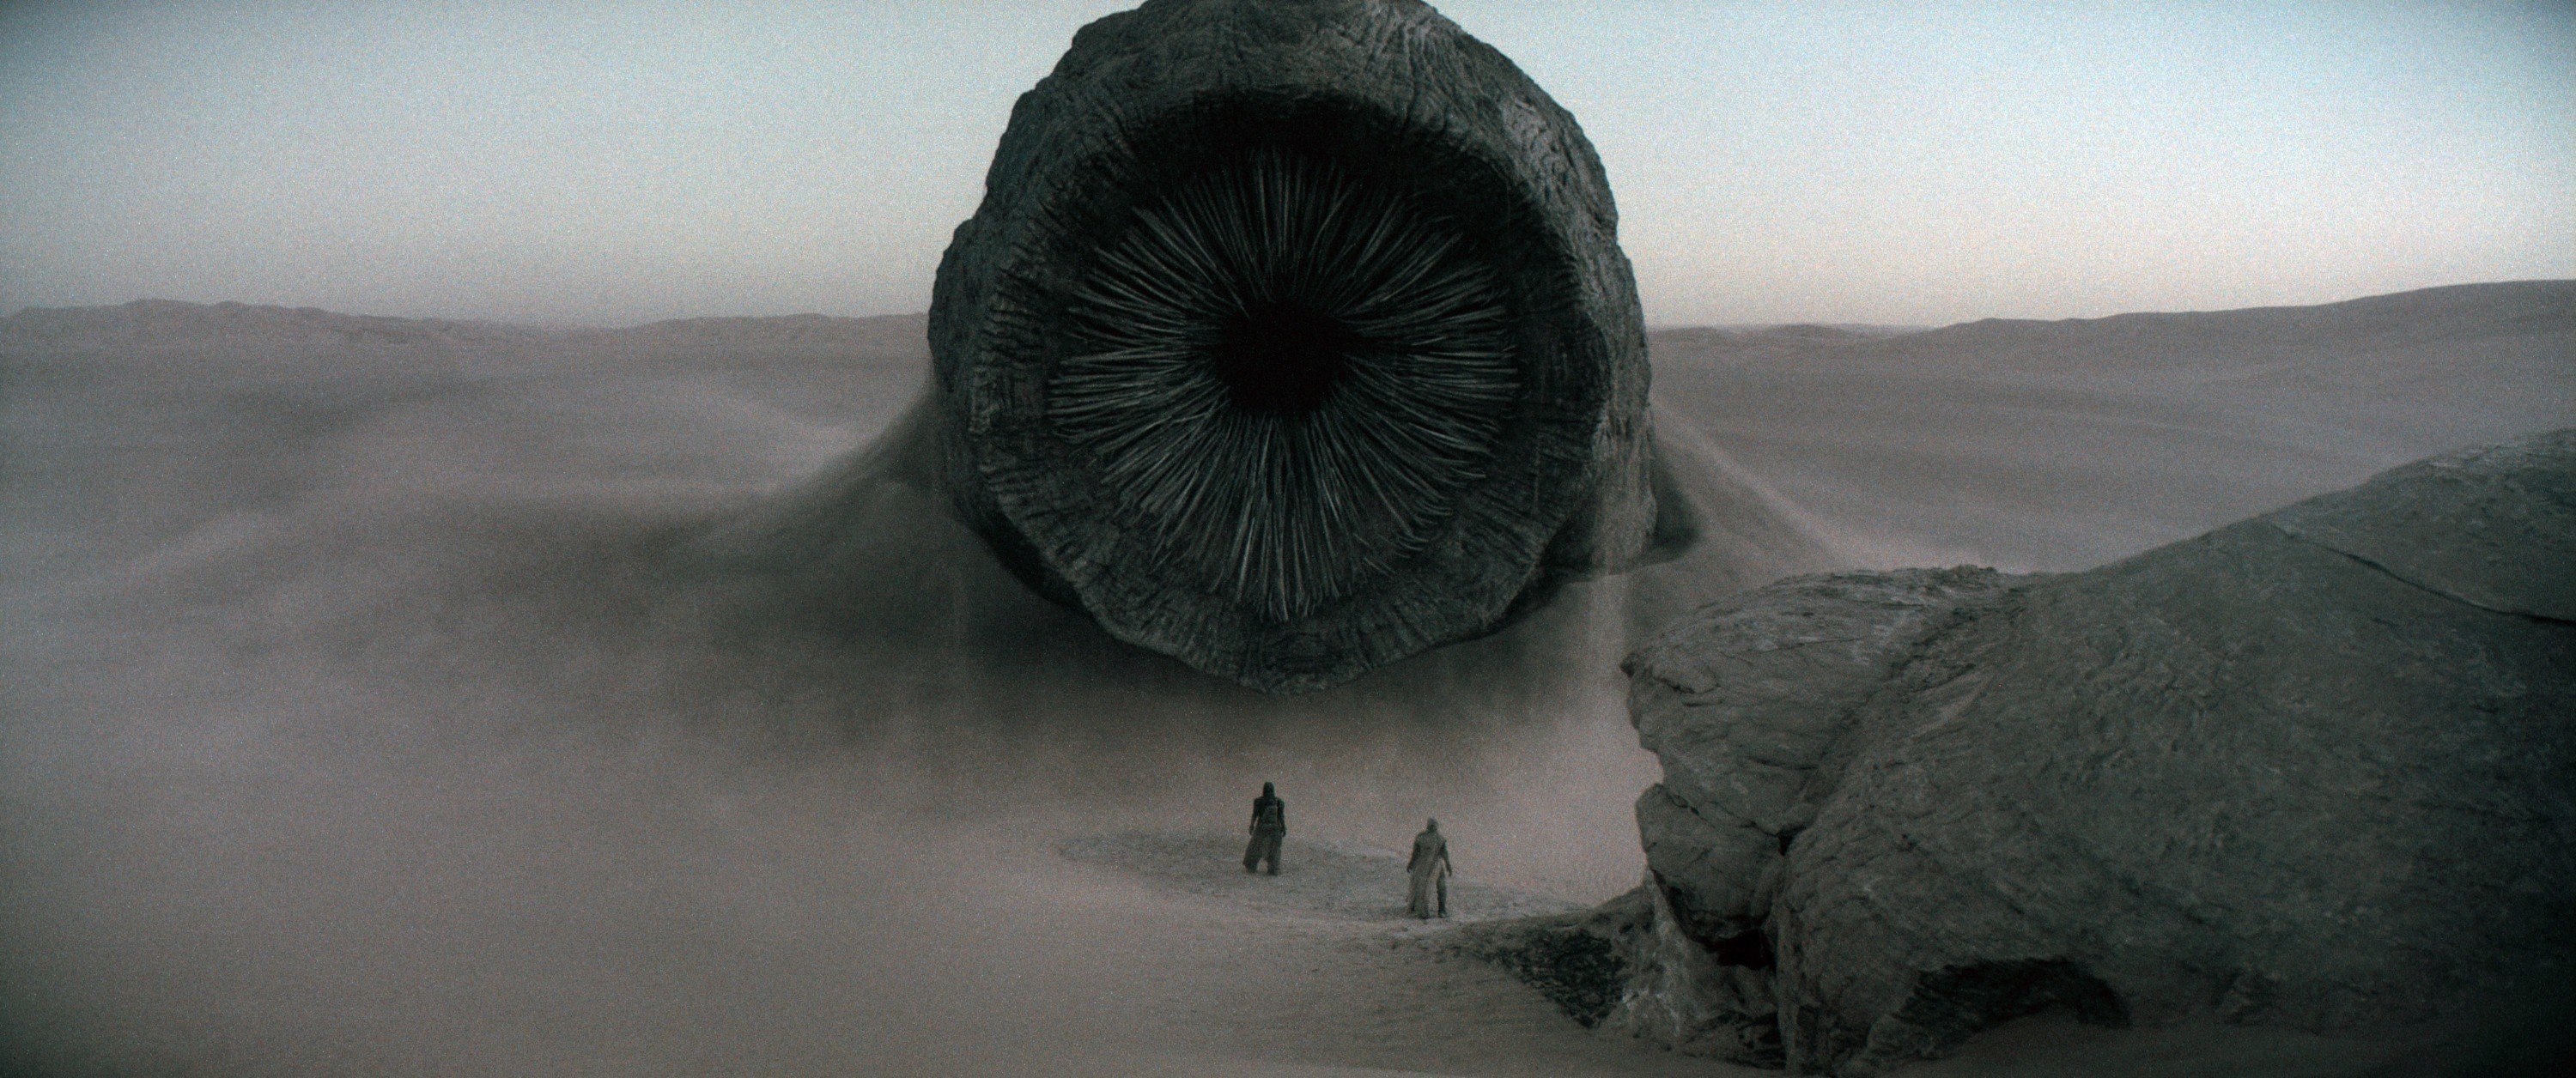 A large sand worm in &quot;Dune&quot;